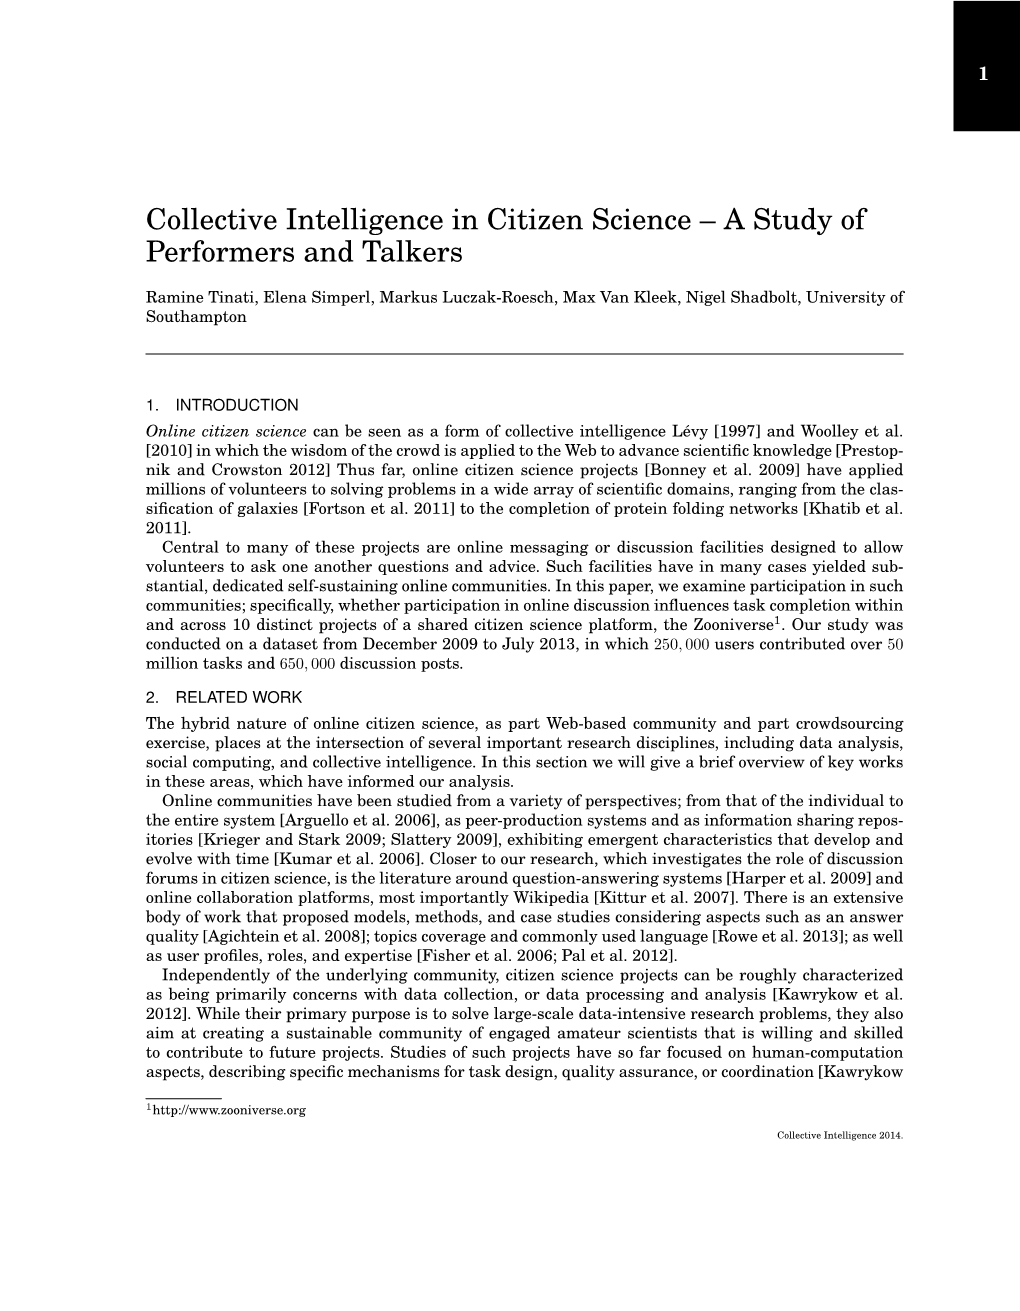 Collective Intelligence in Citizen Science – a Study of Performers and Talkers